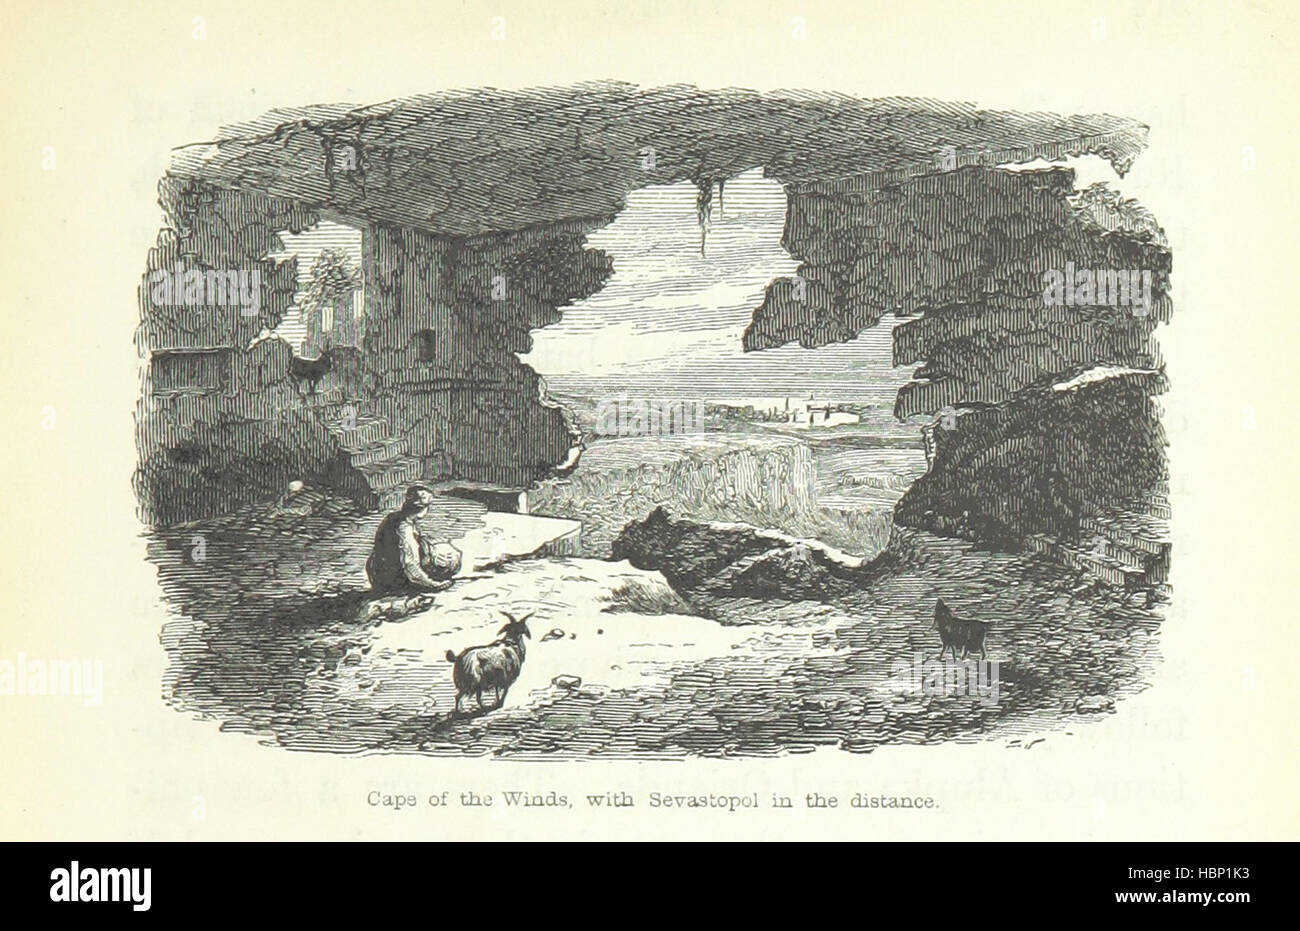 Image taken from page 337 of 'The Russian Shores of the Black Sea in the Autumn of 1852, with a voyage down the Volga, and a tour through the country of the Don Cossacks' Image taken from page 337 of 'The Russian Shores of Stock Photo